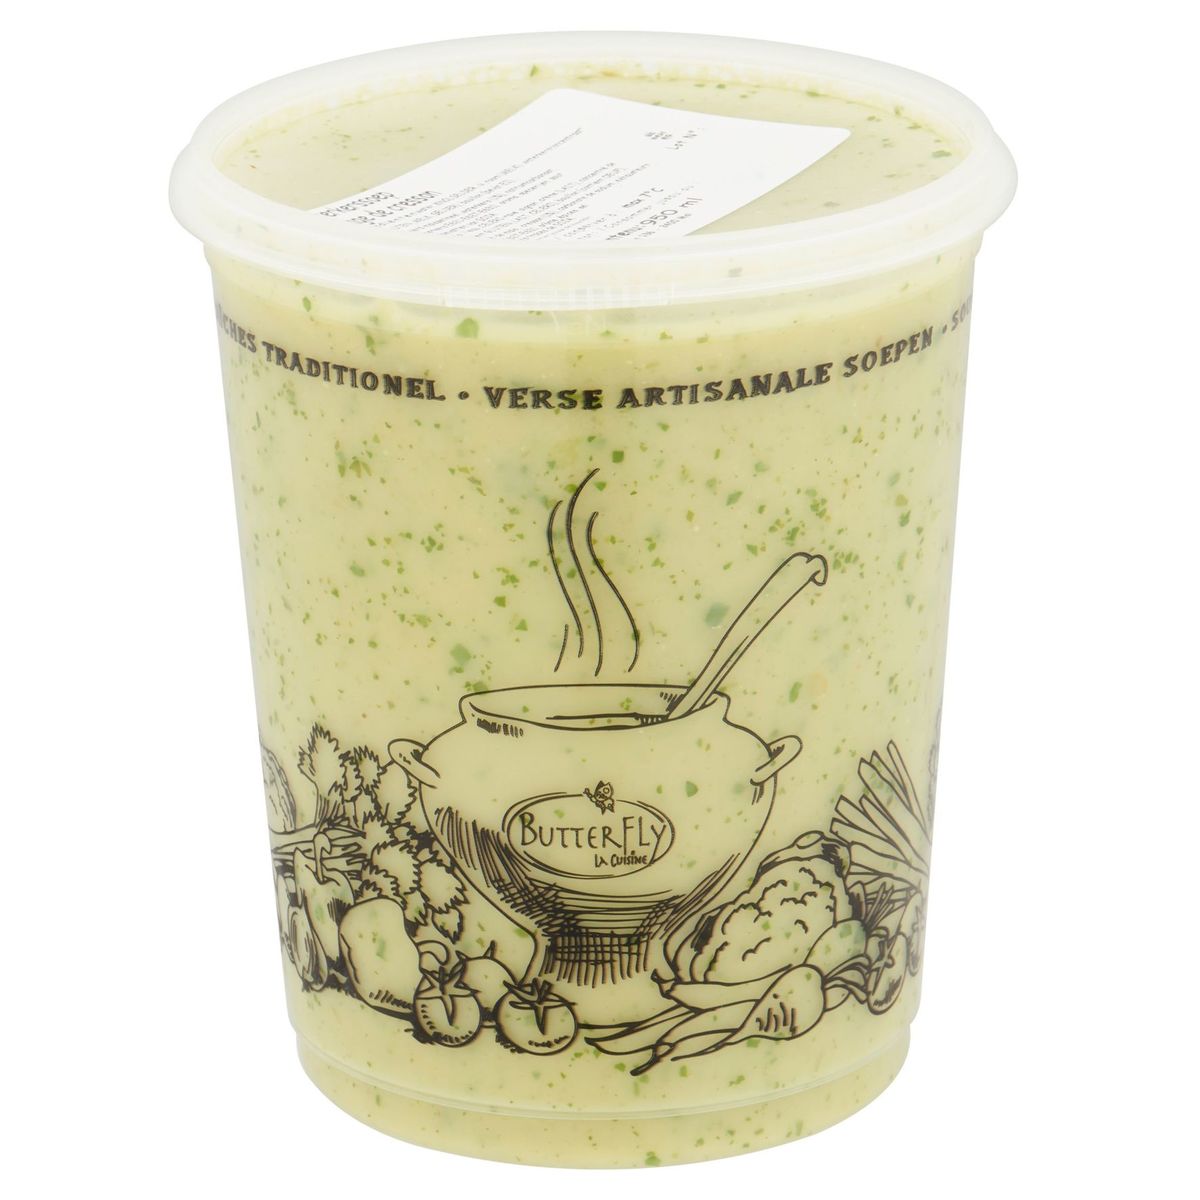 Butterfly Soupe au Cresson 950 ml